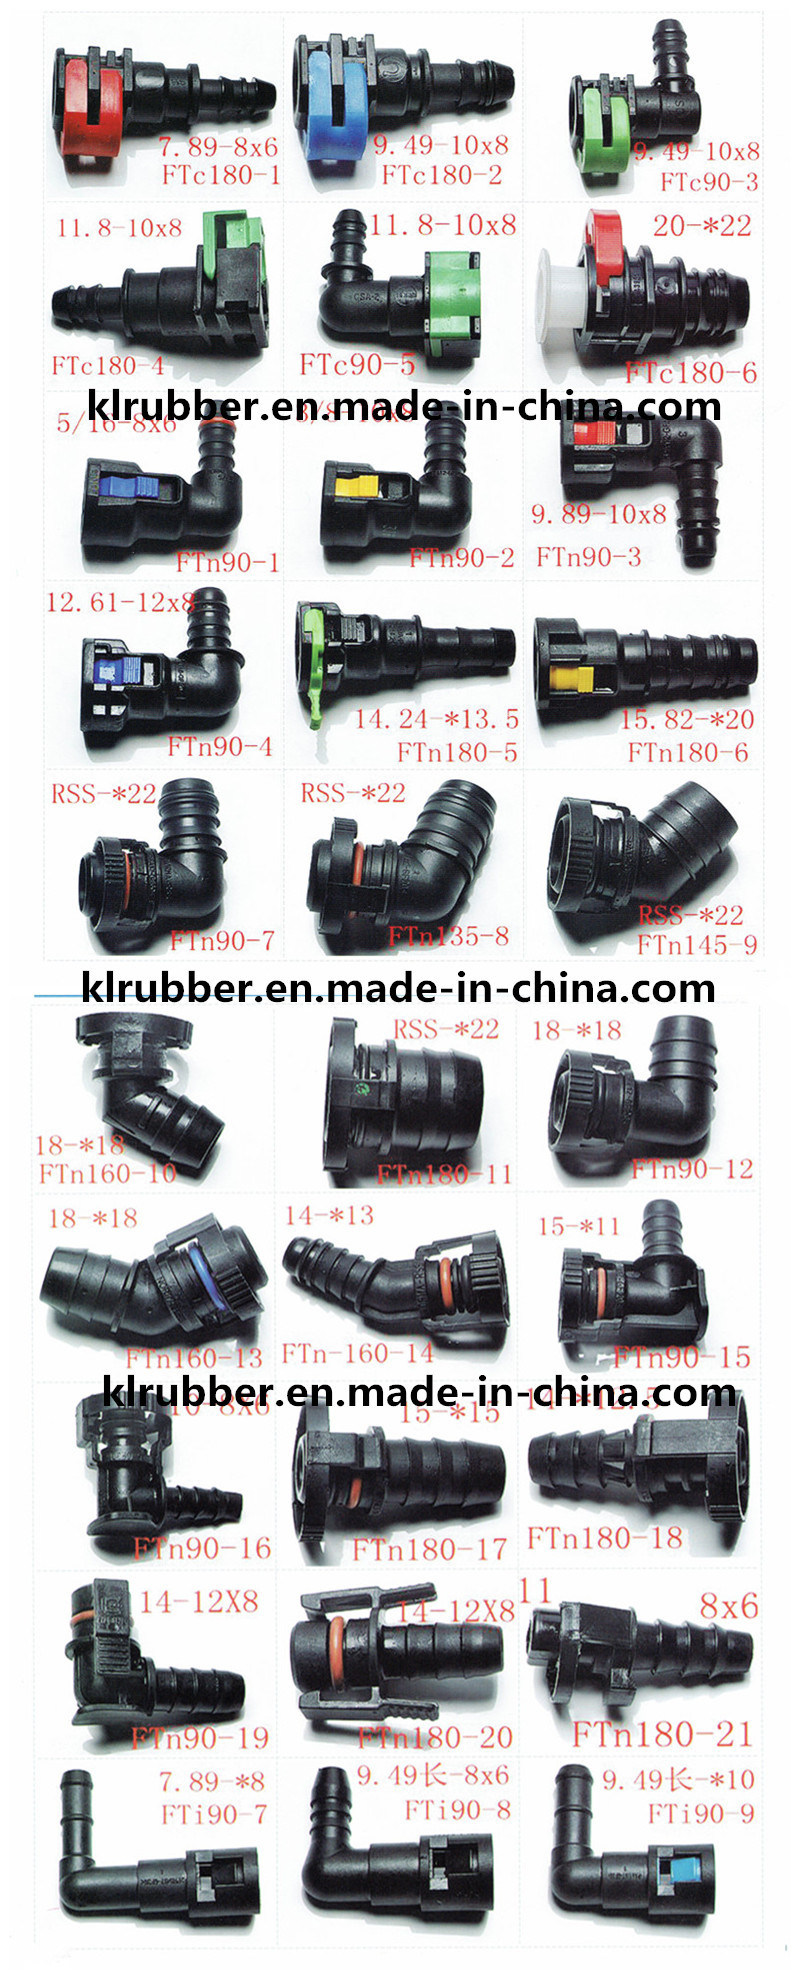 Different T Type Plastic Pipe Fittings for Hydraulic Hose